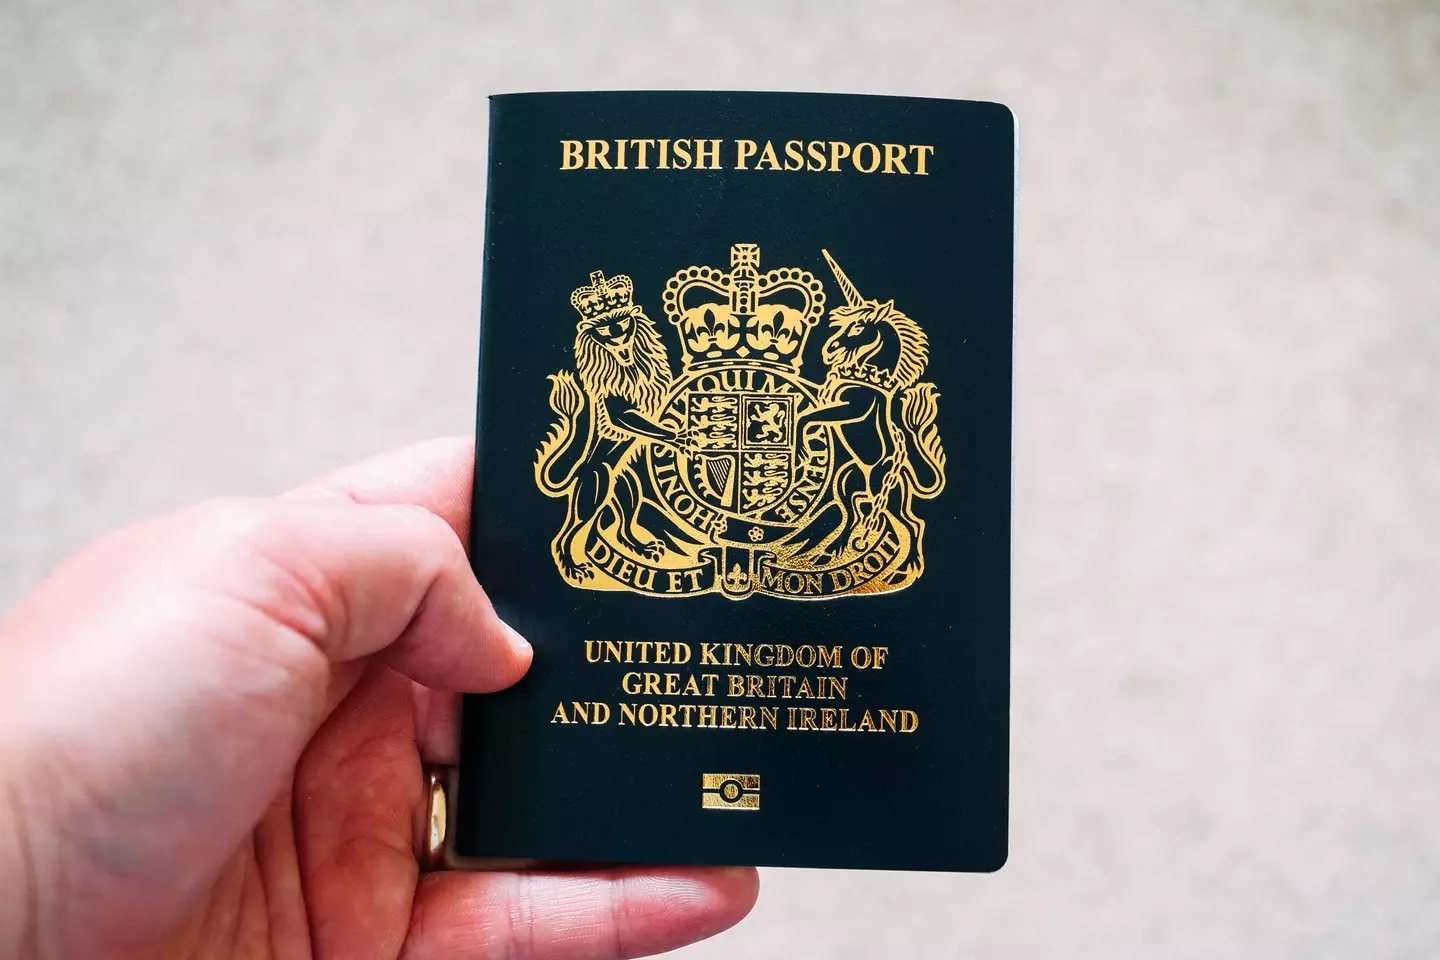 There are two details you should be checking on your passport.